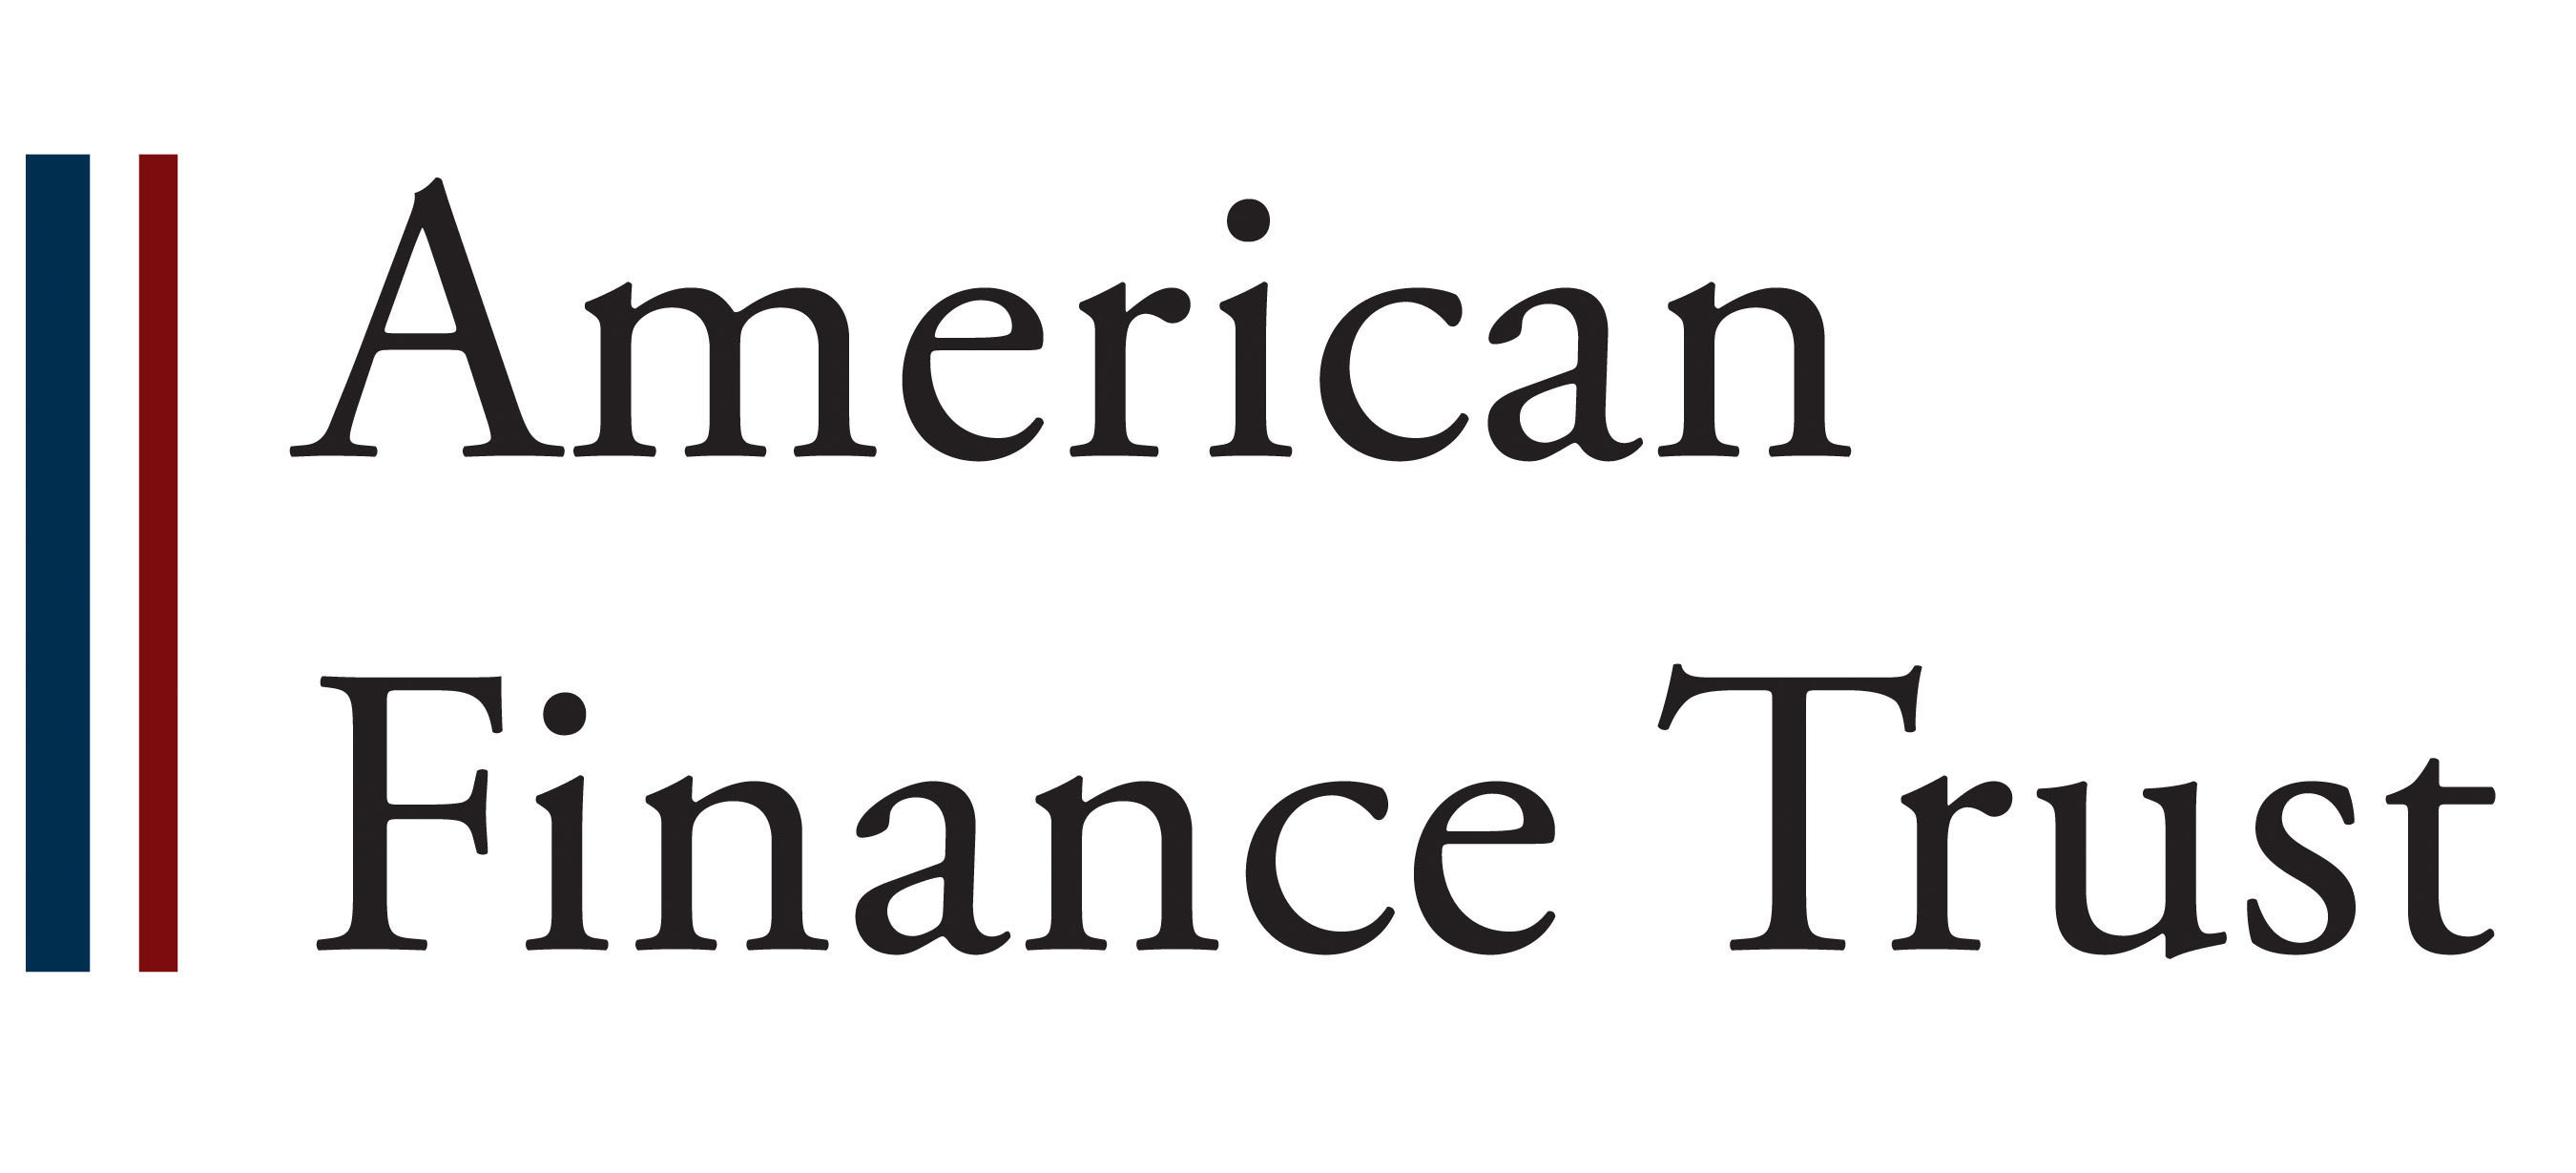 American Finance Trust Announces Upsizing of Unsecured Credit Facility ...